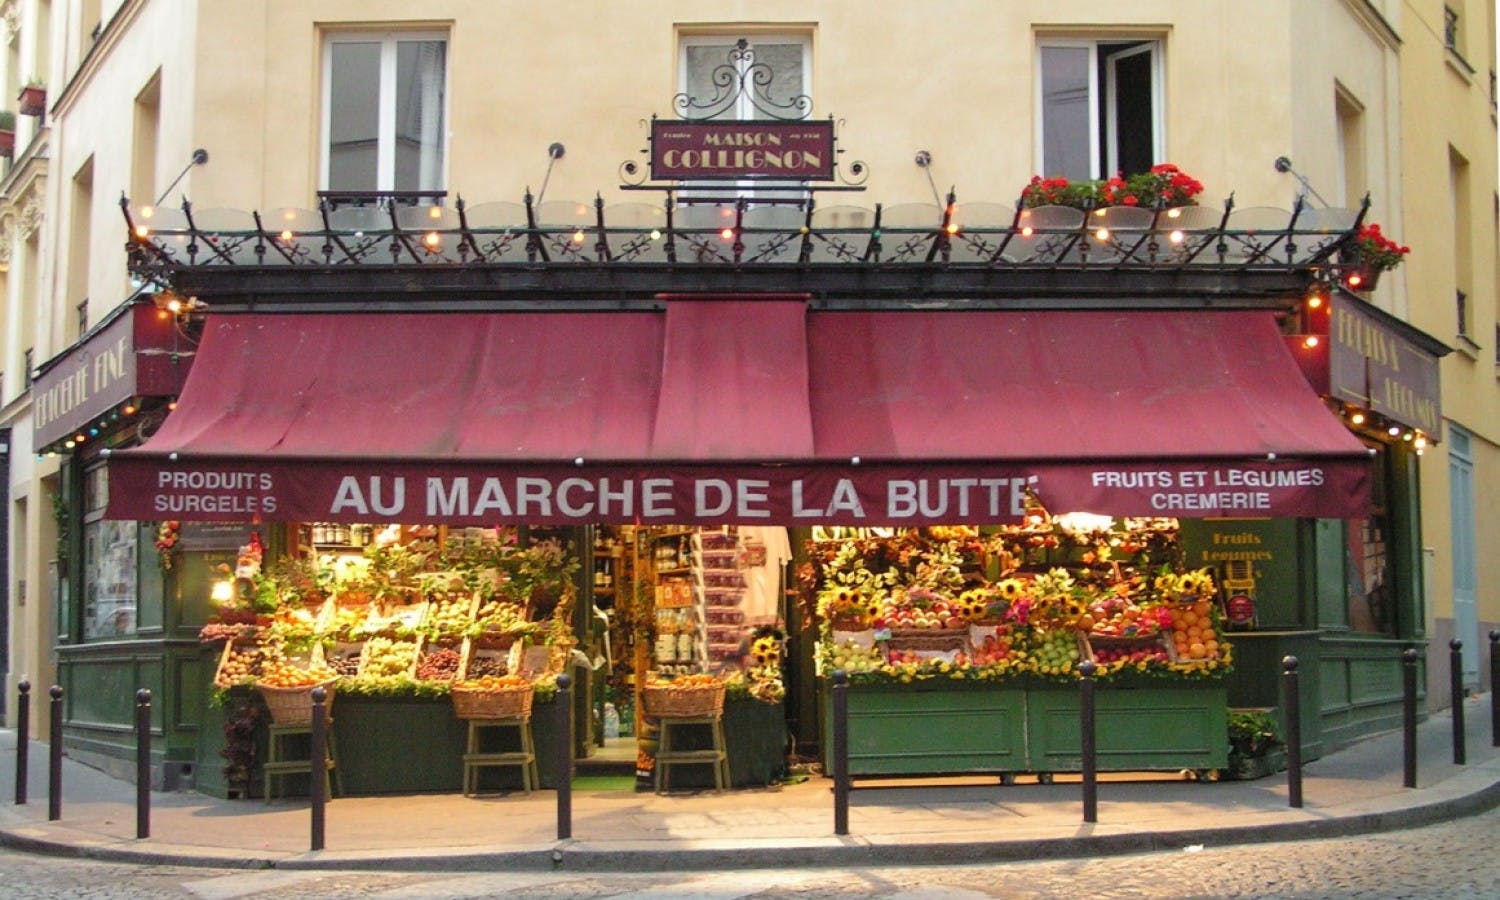 Montmartre: Cinema, Stars and Glamour Walking Tour